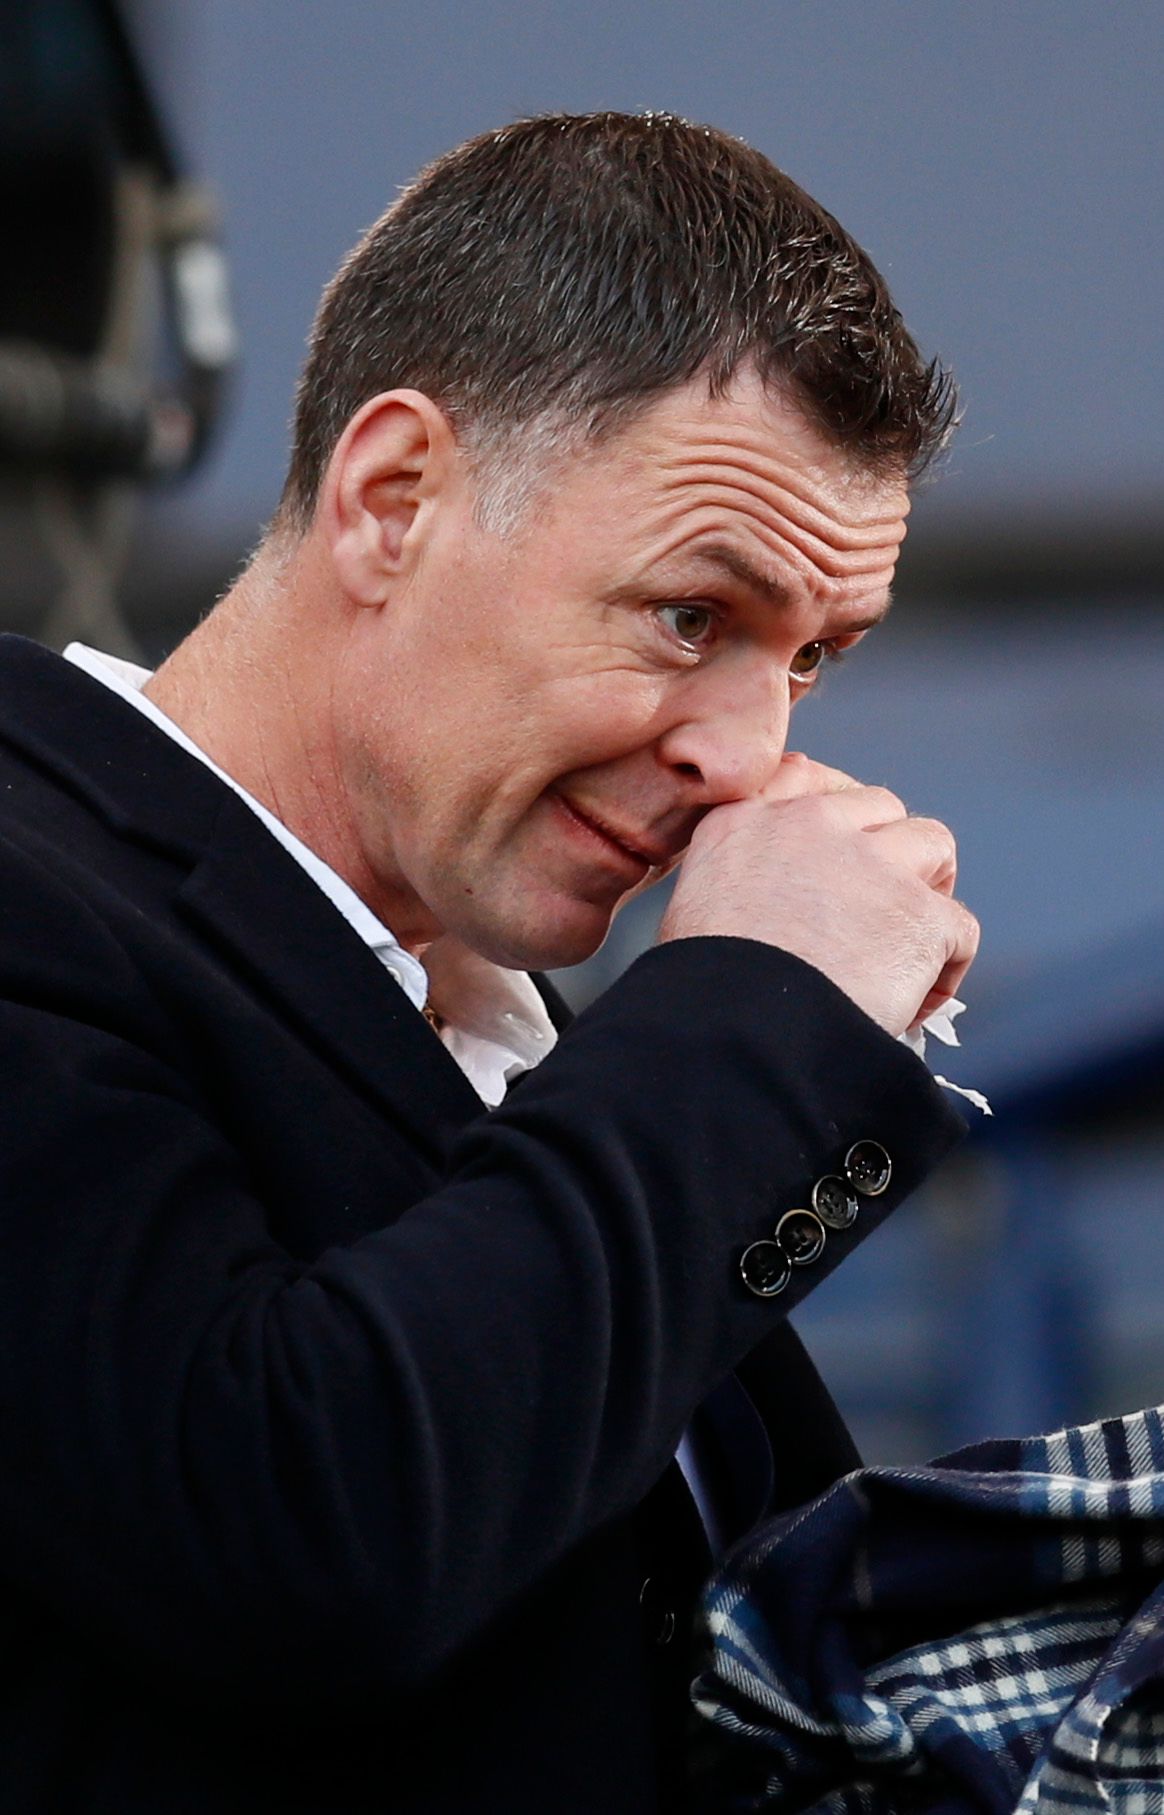 Britain Football Soccer - Aberdeen v Celtic - Scottish League Cup Final - Hampden Park, Glasgow, Scotland - 27/11/16 Chris Sutton before the match  Action Images via Reuters / Jason Cairnduff Livepic EDITORIAL USE ONLY. No use with unauthorized audio, video, data, fixture lists, club/league logos or 